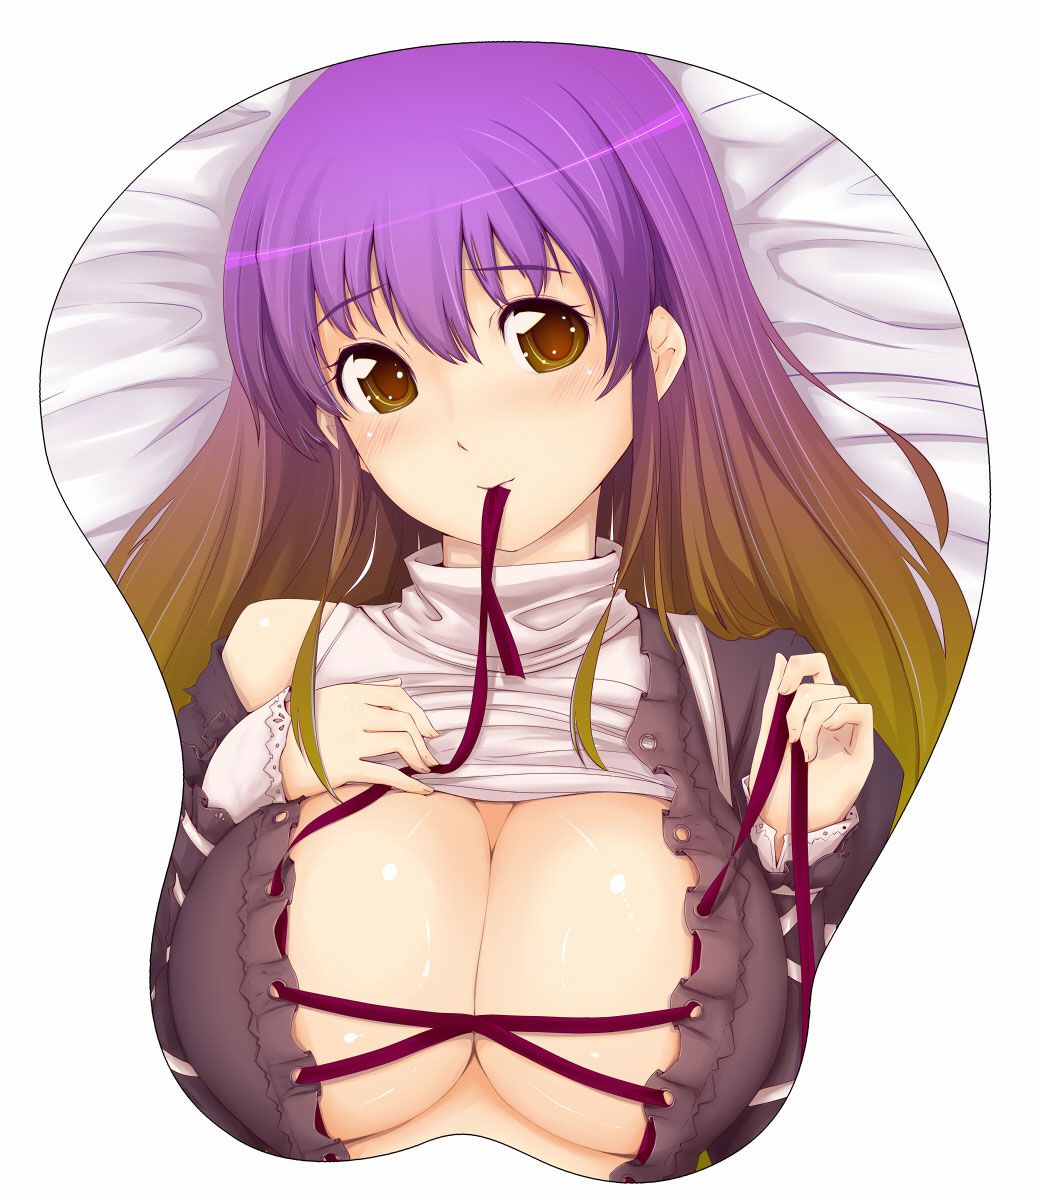 2D and. oppai mouse pad want erotic images, 50 sheets 1